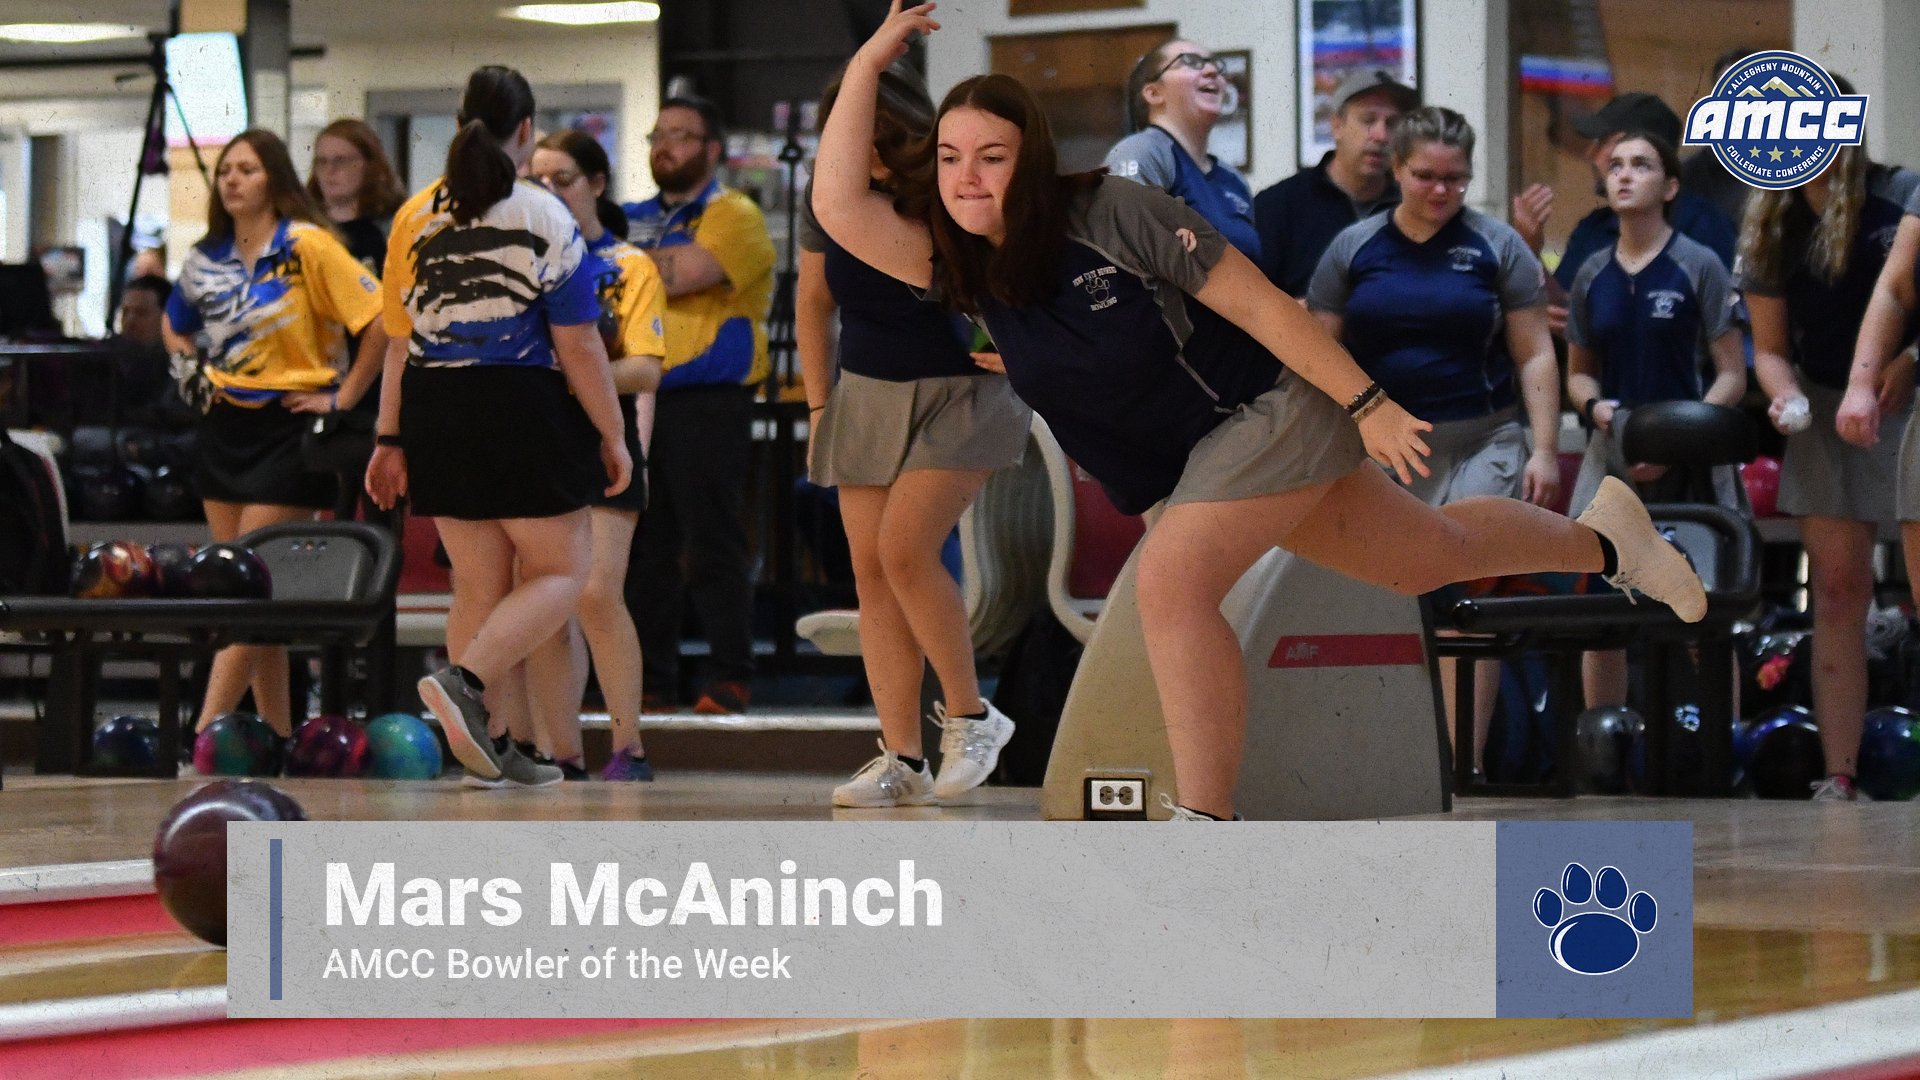 McAninch Named AMCC Bowler of the Week